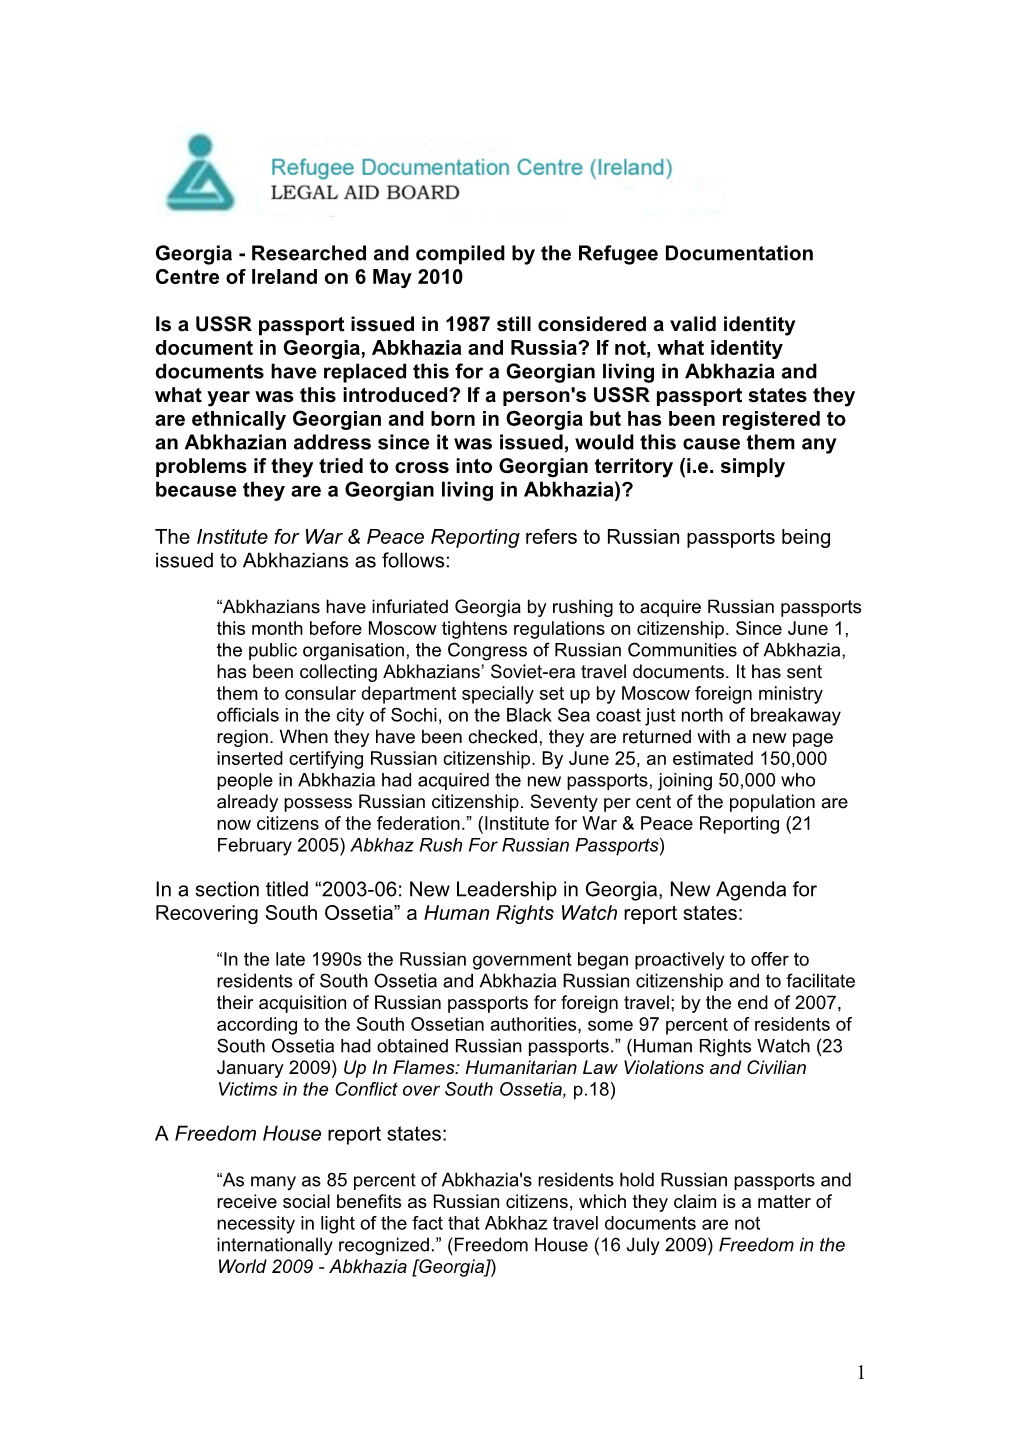 Georgia - Researched and Compiled by the Refugee Documentation Centre of Ireland on 6 May 2010